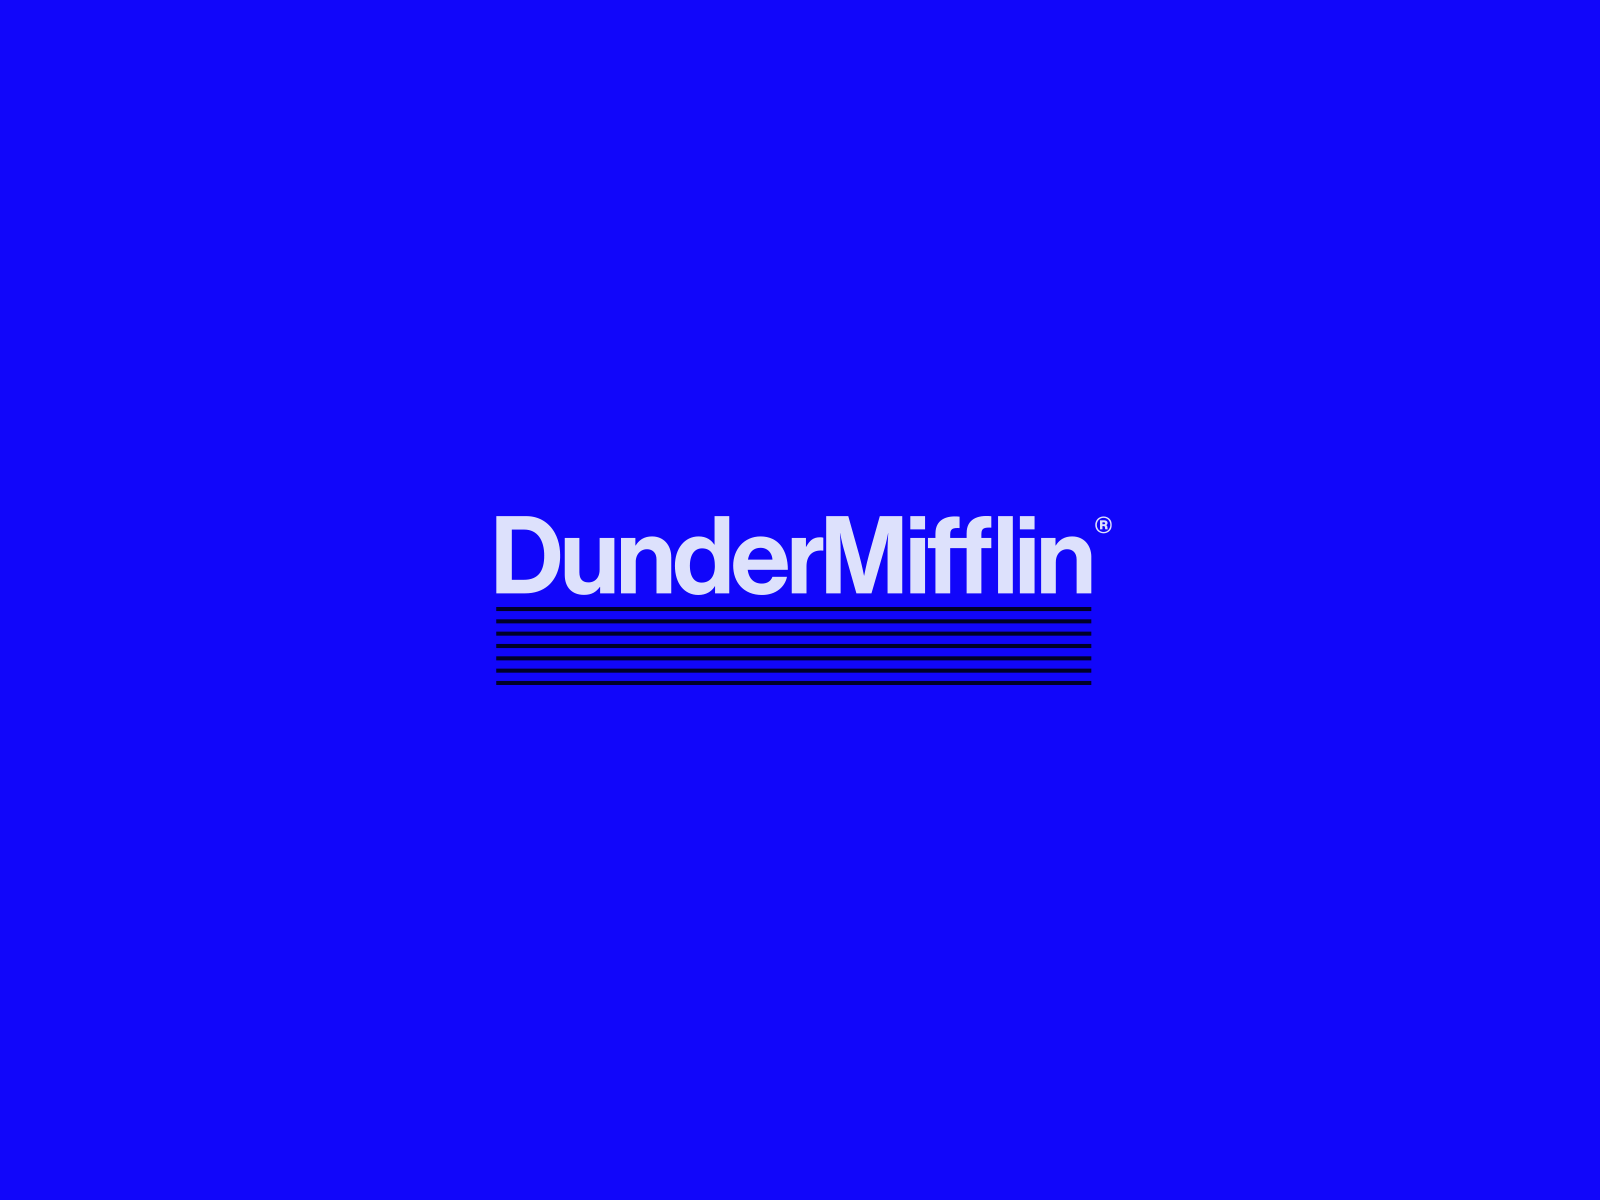 Brand New: New Logo and Identity for Dunder Mifflin